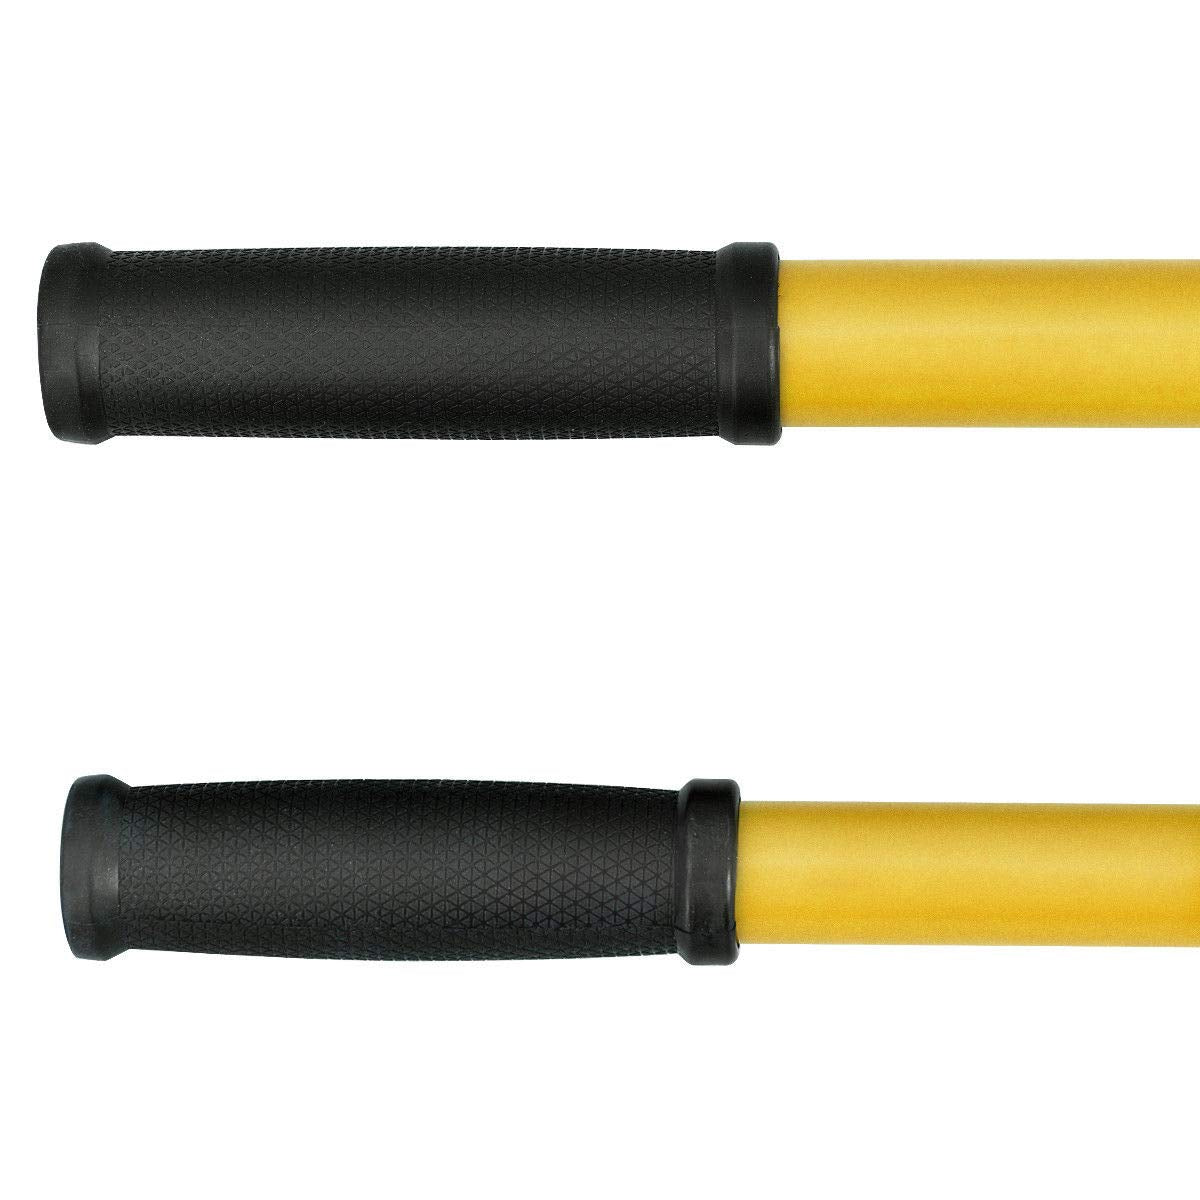 17.5" to 24" Tire Changer Mount Demount Removal Tool Tubeless Truck Bead (Yellow)